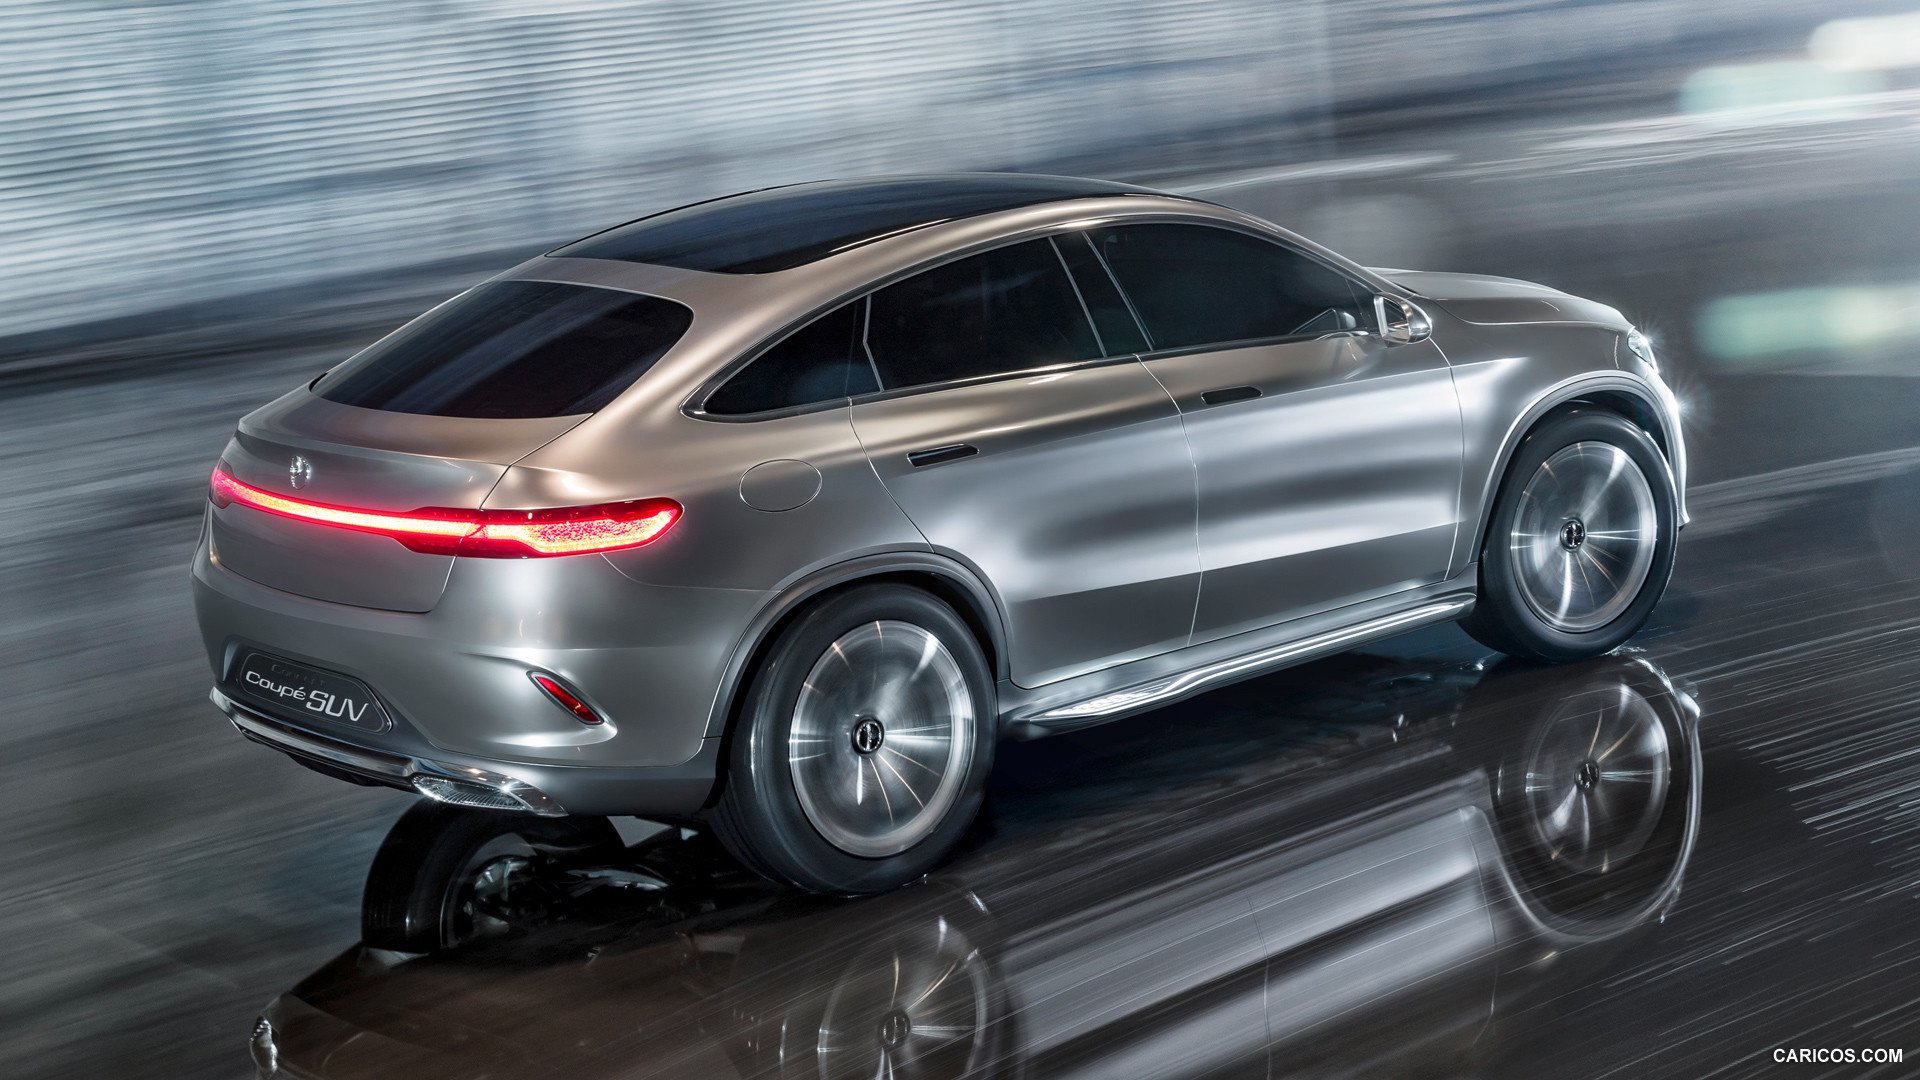 2014 Mercedes-Benz Coupe SUV Concept  - Top, #2 of 17